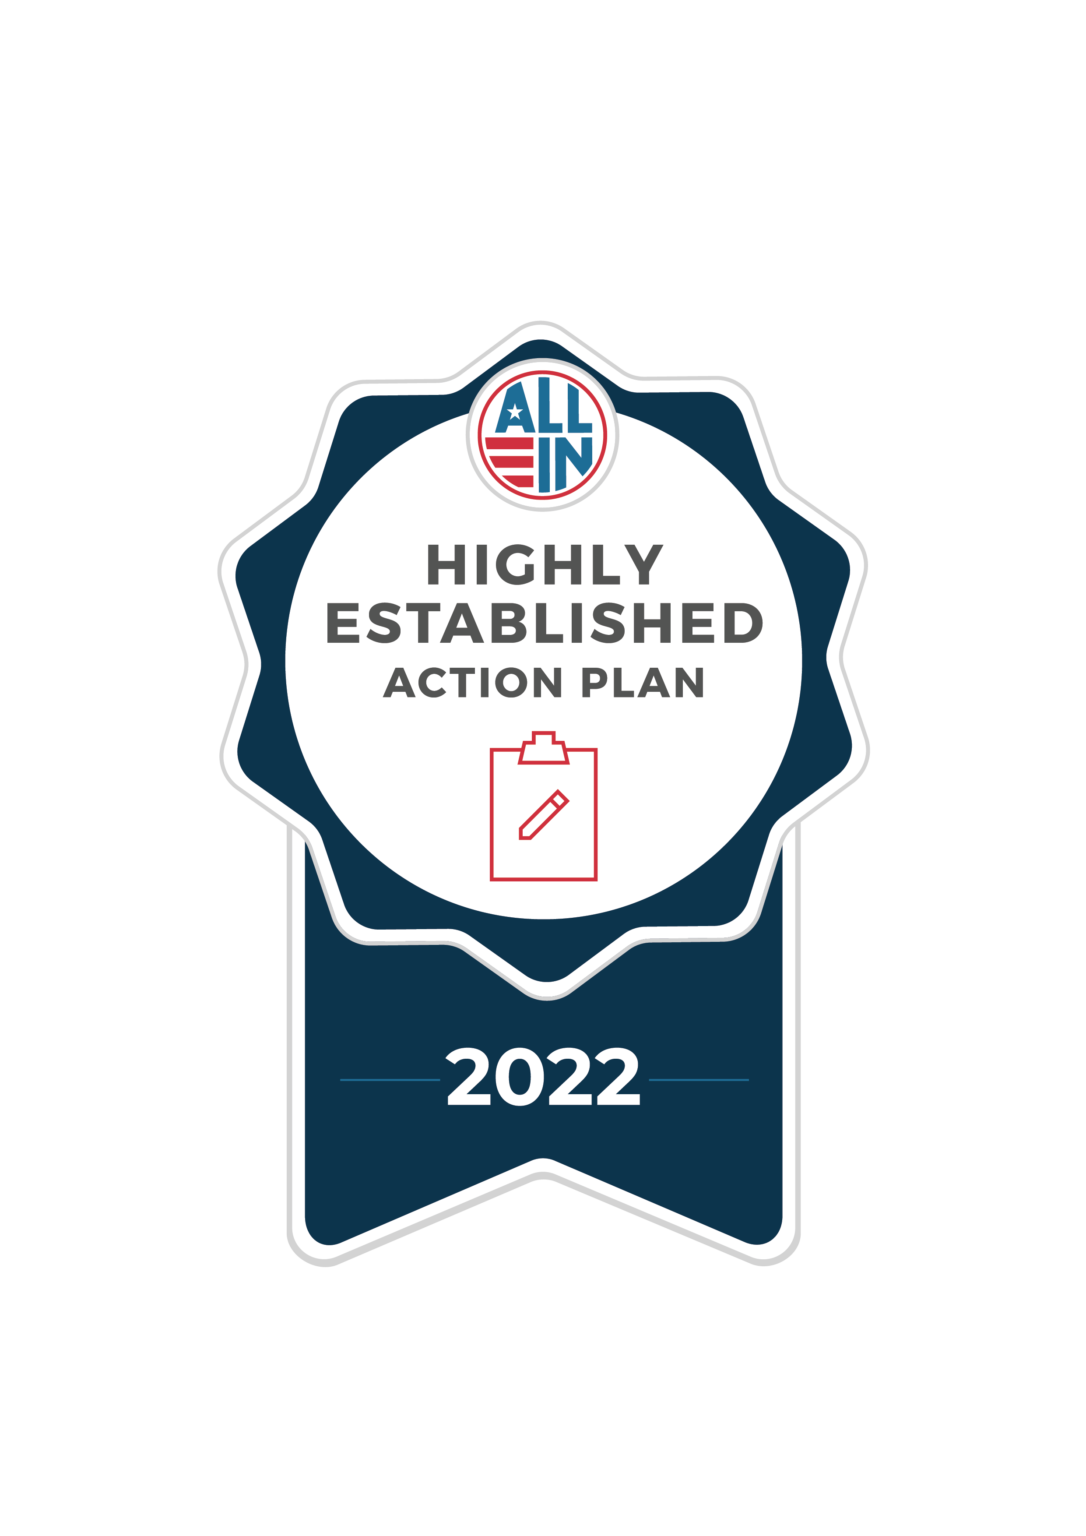 UWParkside awarded the 2022 ALL IN Highly Established Action Plan Seal